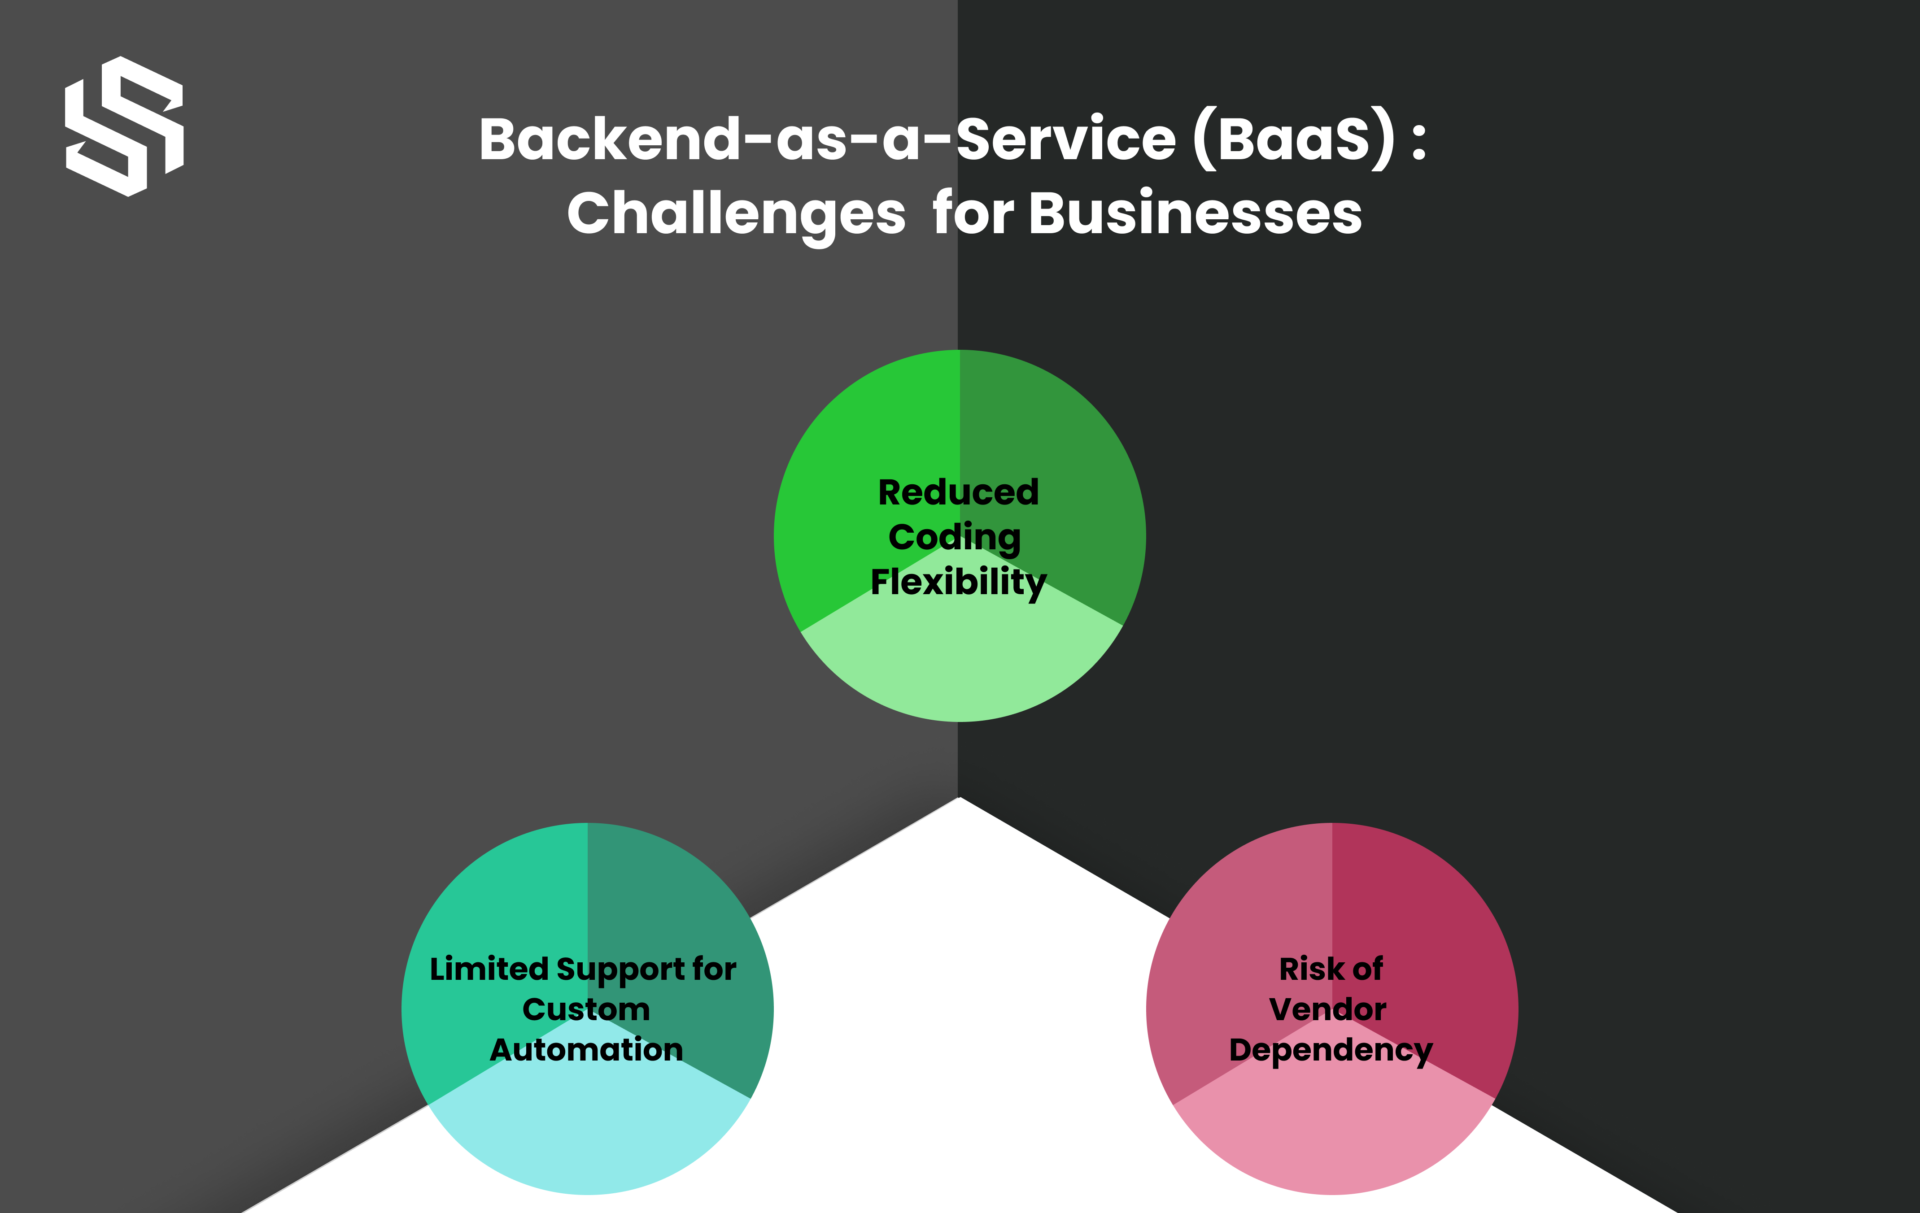 Challenges of Backend-as-a-Service (BaaS) for Businesses